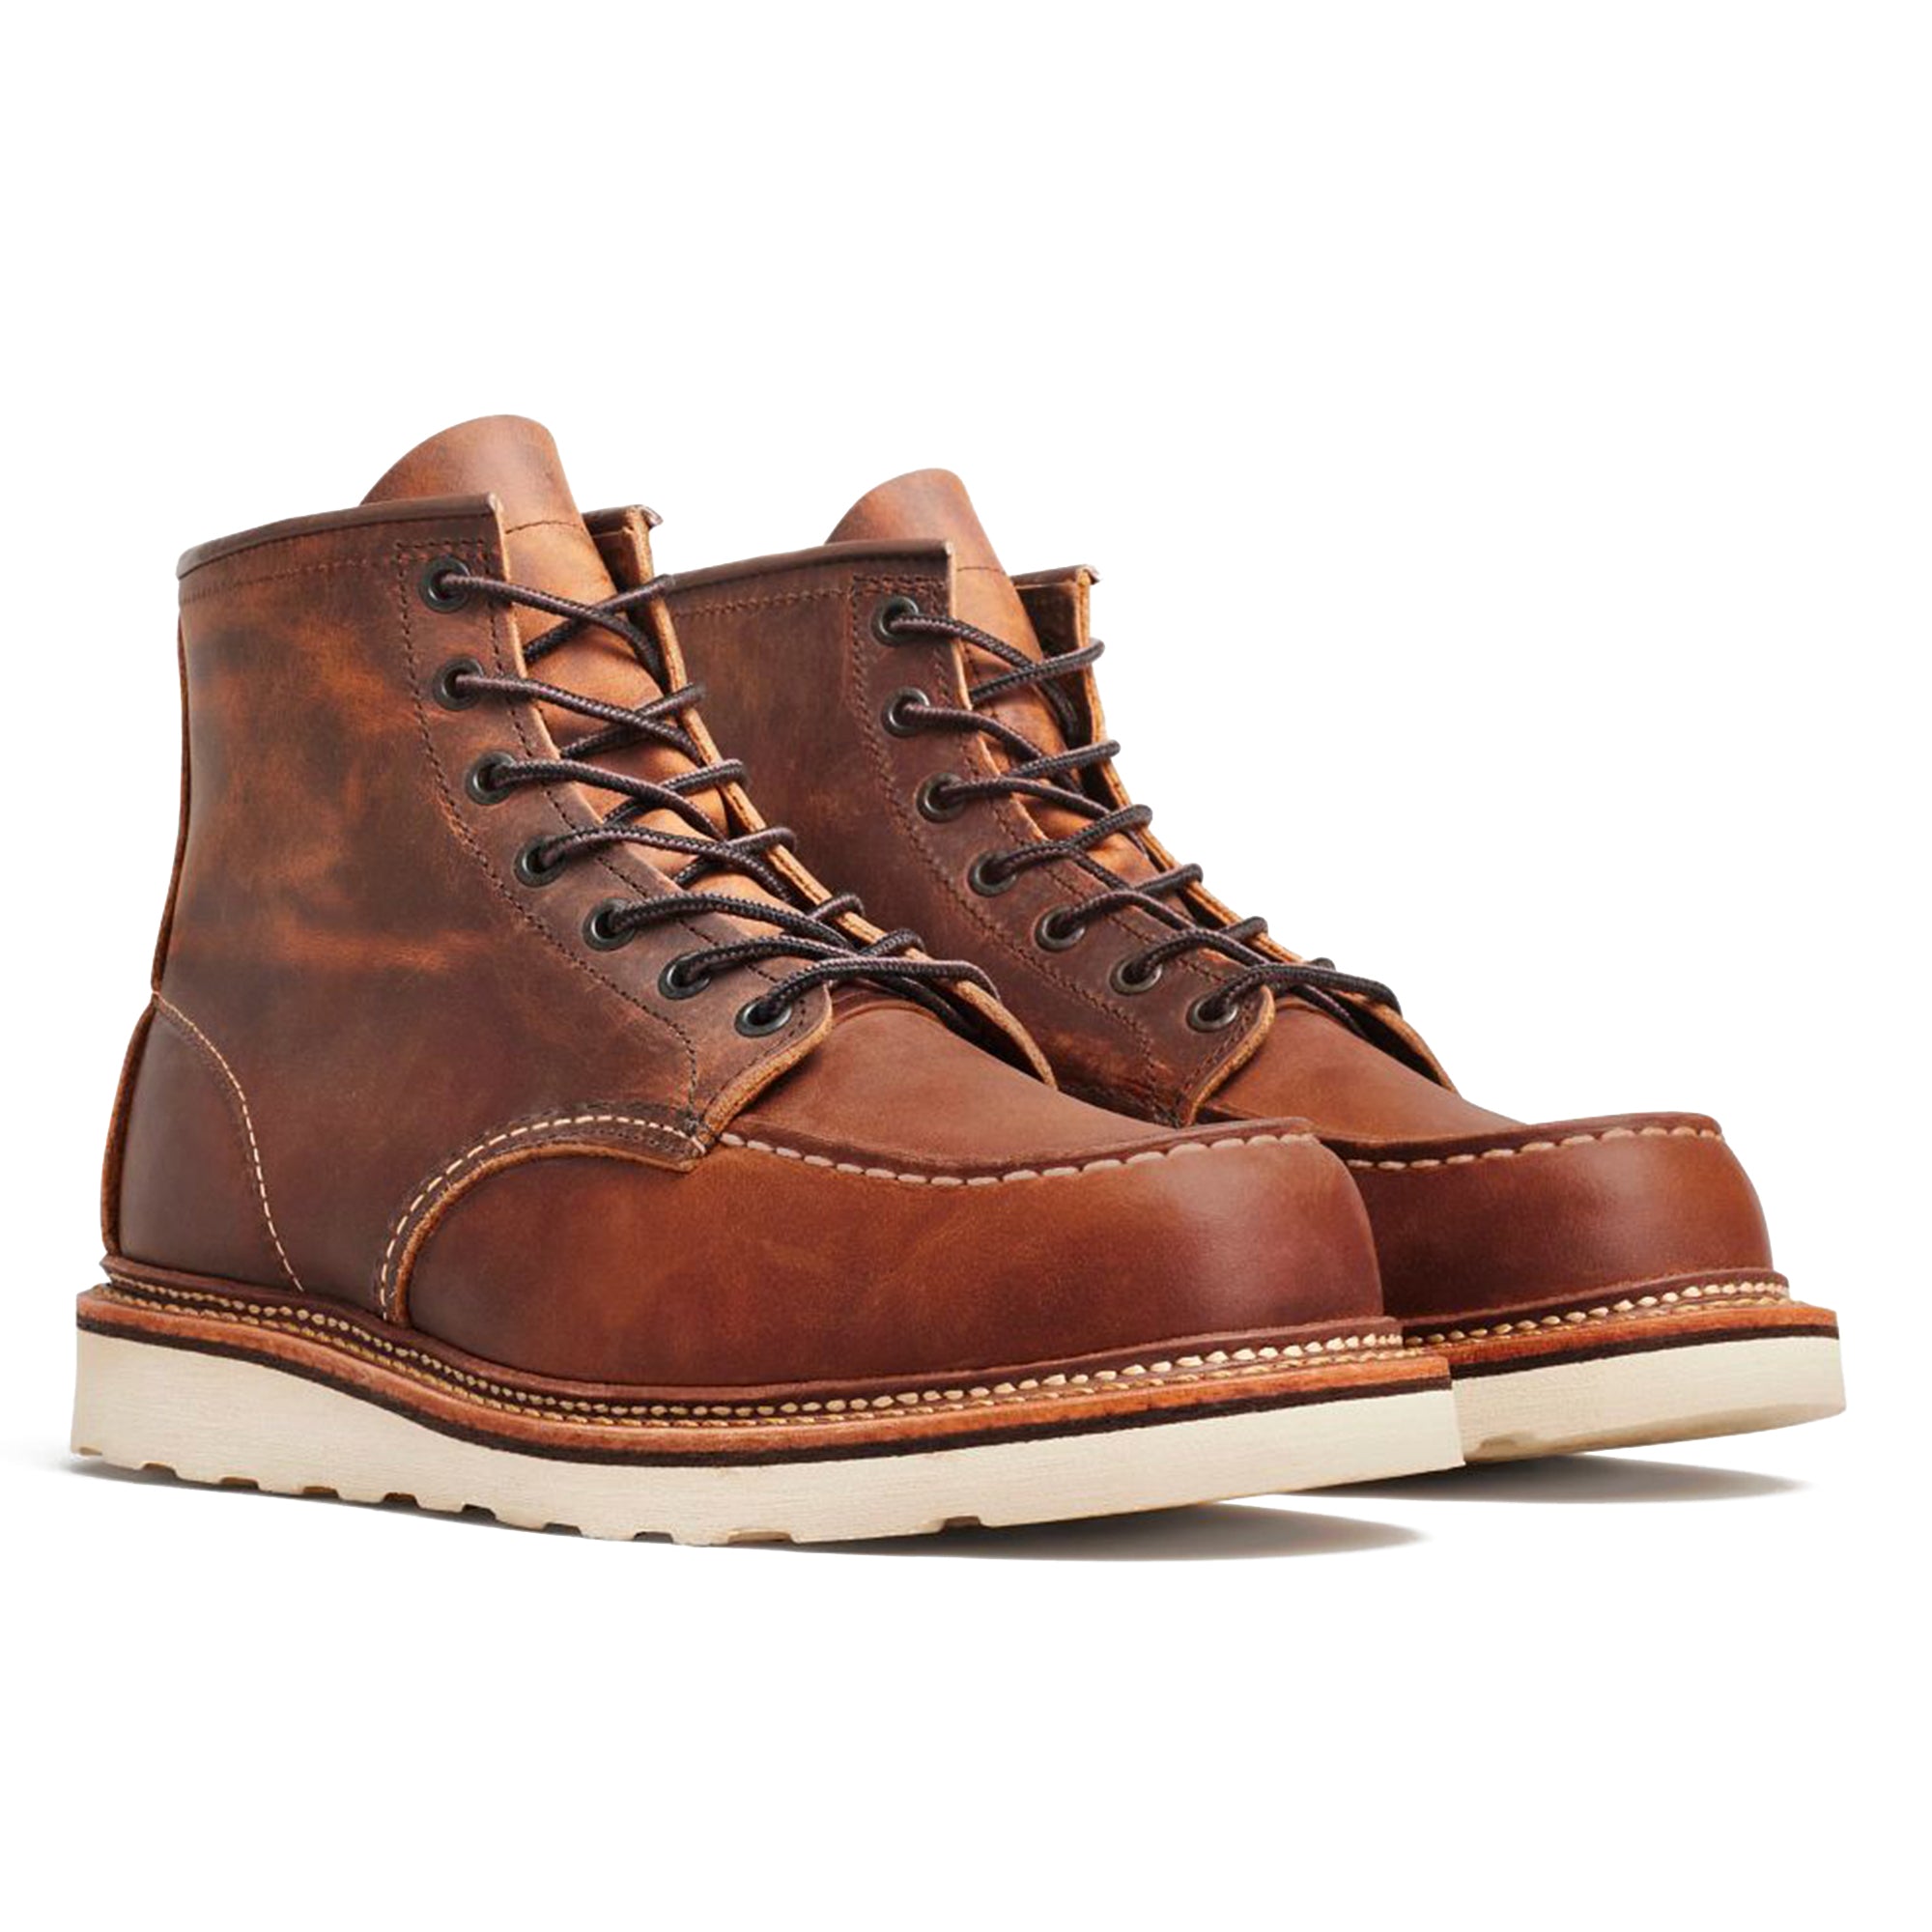 Red Wing 1907 6" Moc Toe Leather Boot - Copper Rough & Tough